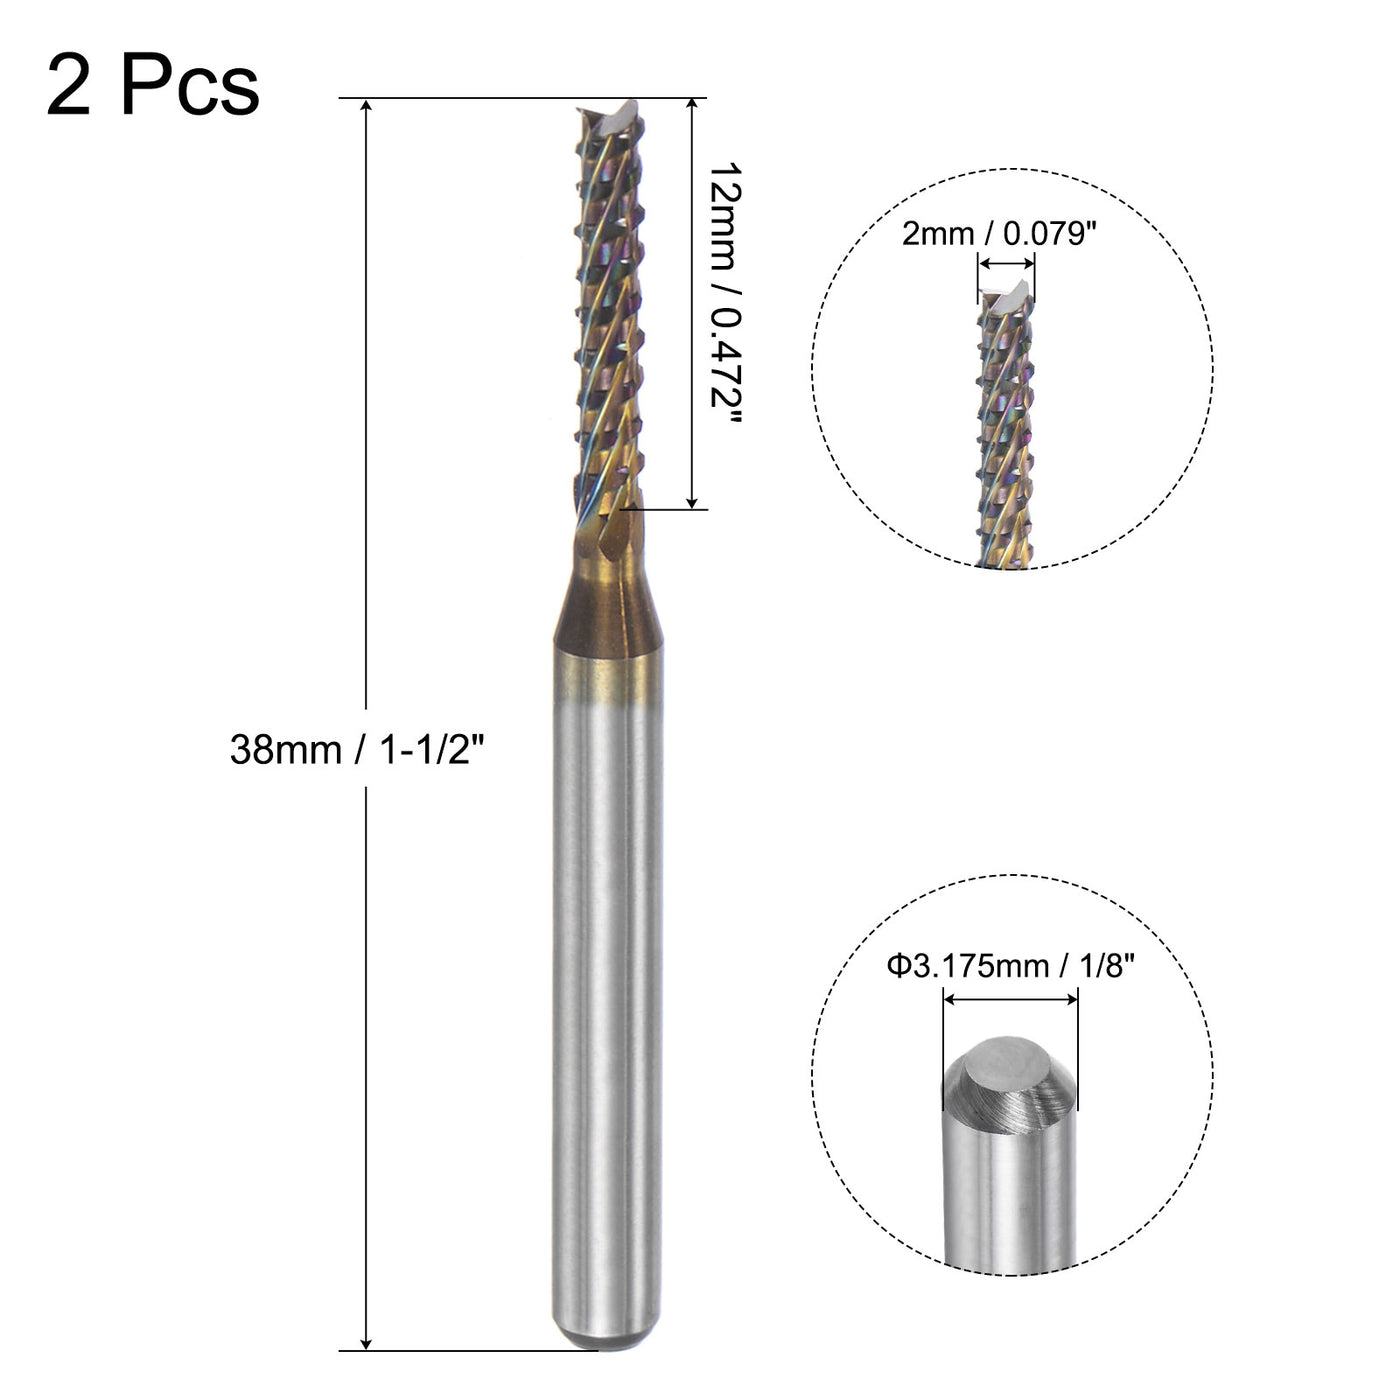 uxcell Uxcell 1/8" Shank 2mm x 12mm Diamond Film Coated Carbide End Mill Router Bits 2pcs